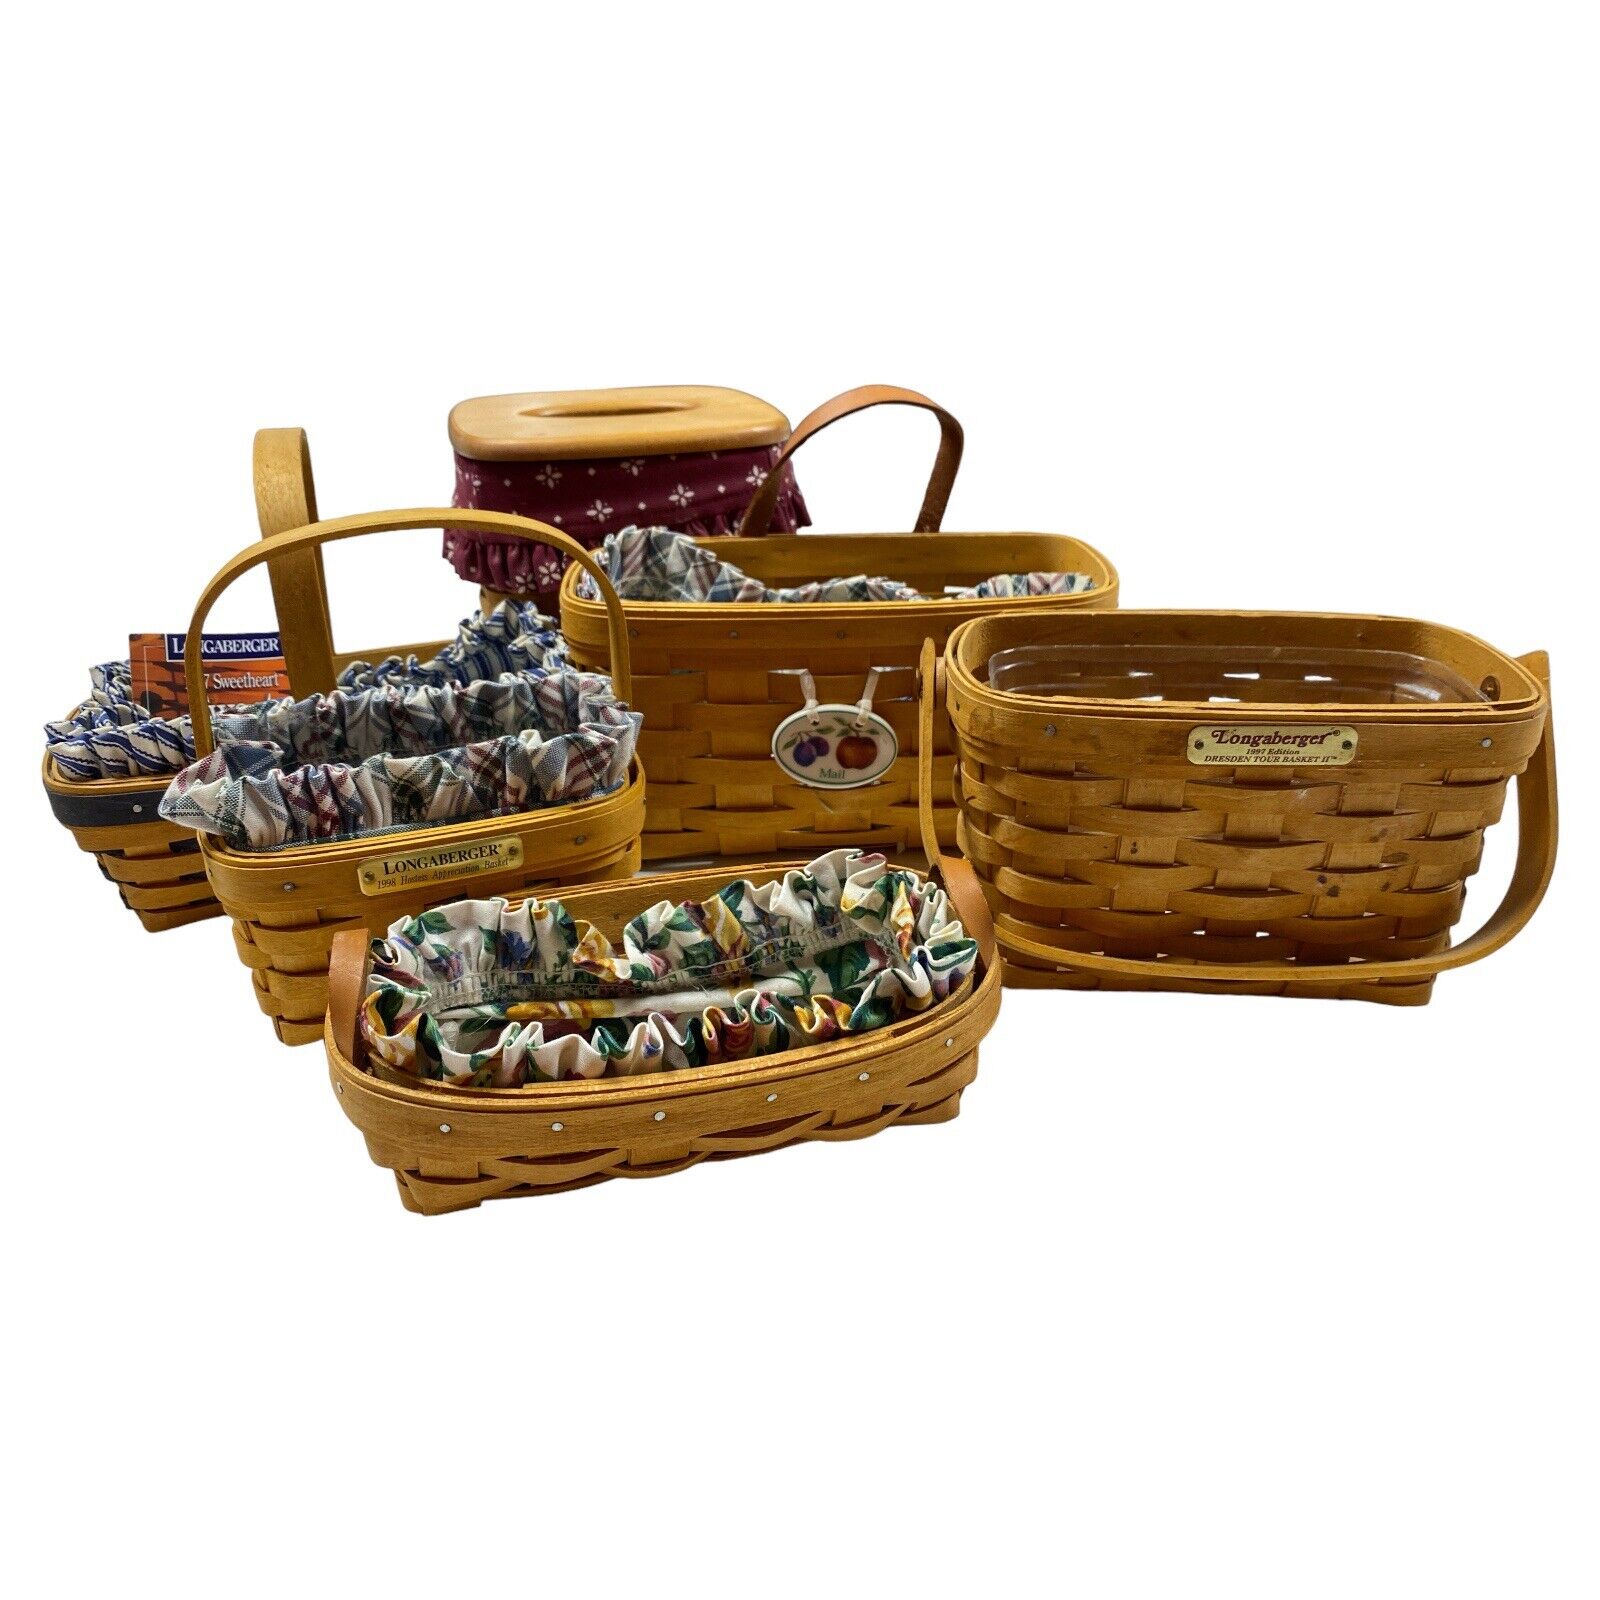 Longaberger Baskets Lot 6 Basket Collection with Lid & Liners Handmade